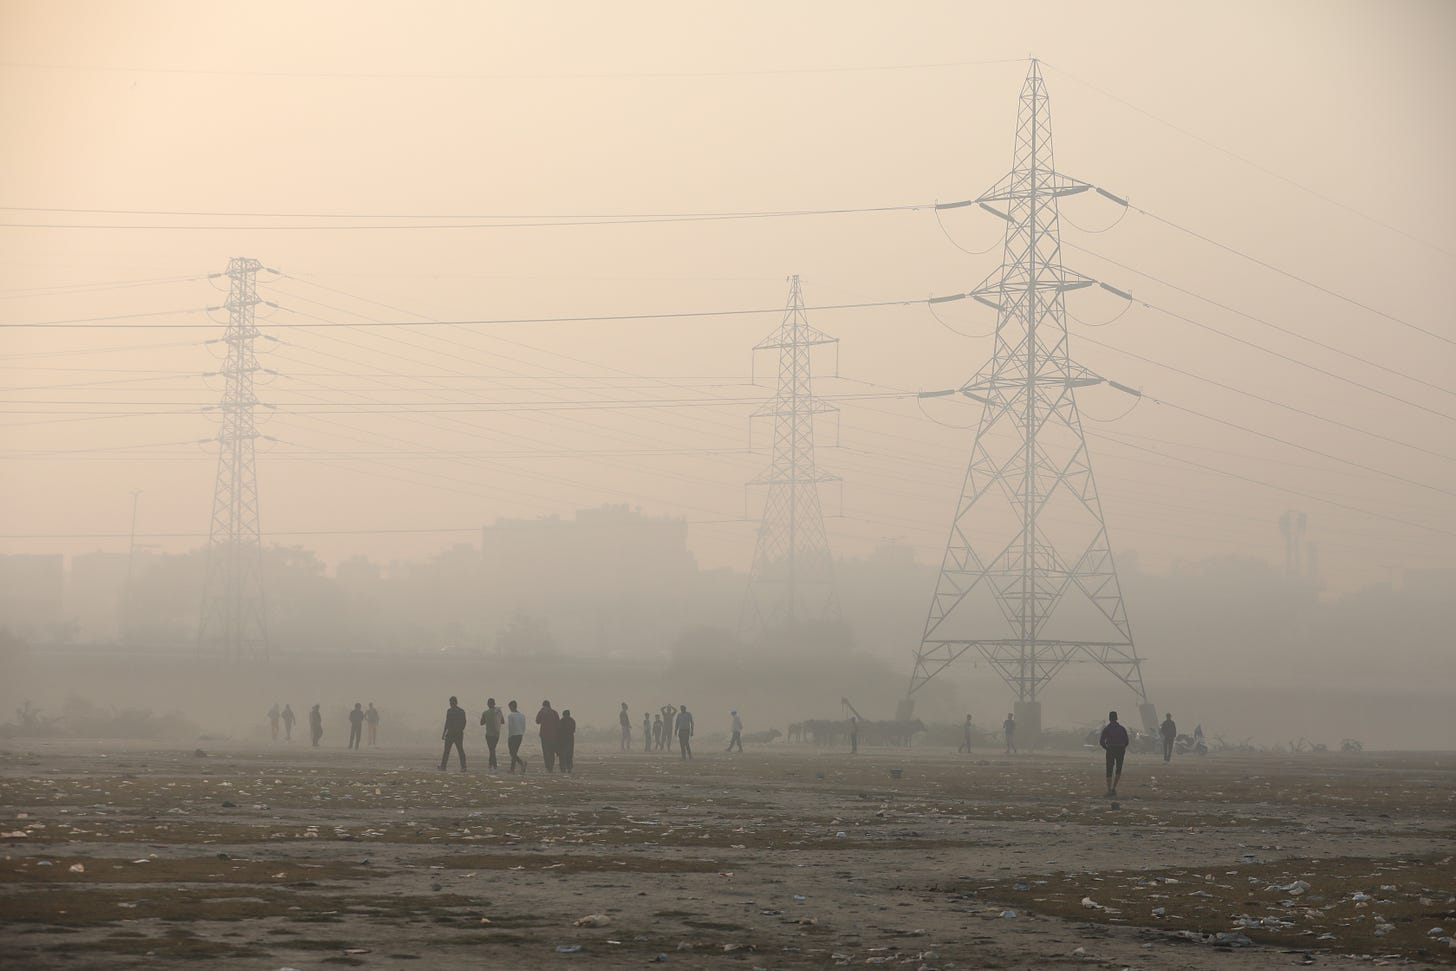 People are seen on the floodplains of the Yamuna river on a smoggy morning in New Delhi, India, November 17, 2021. REUTERS/Anushree Fadnavis